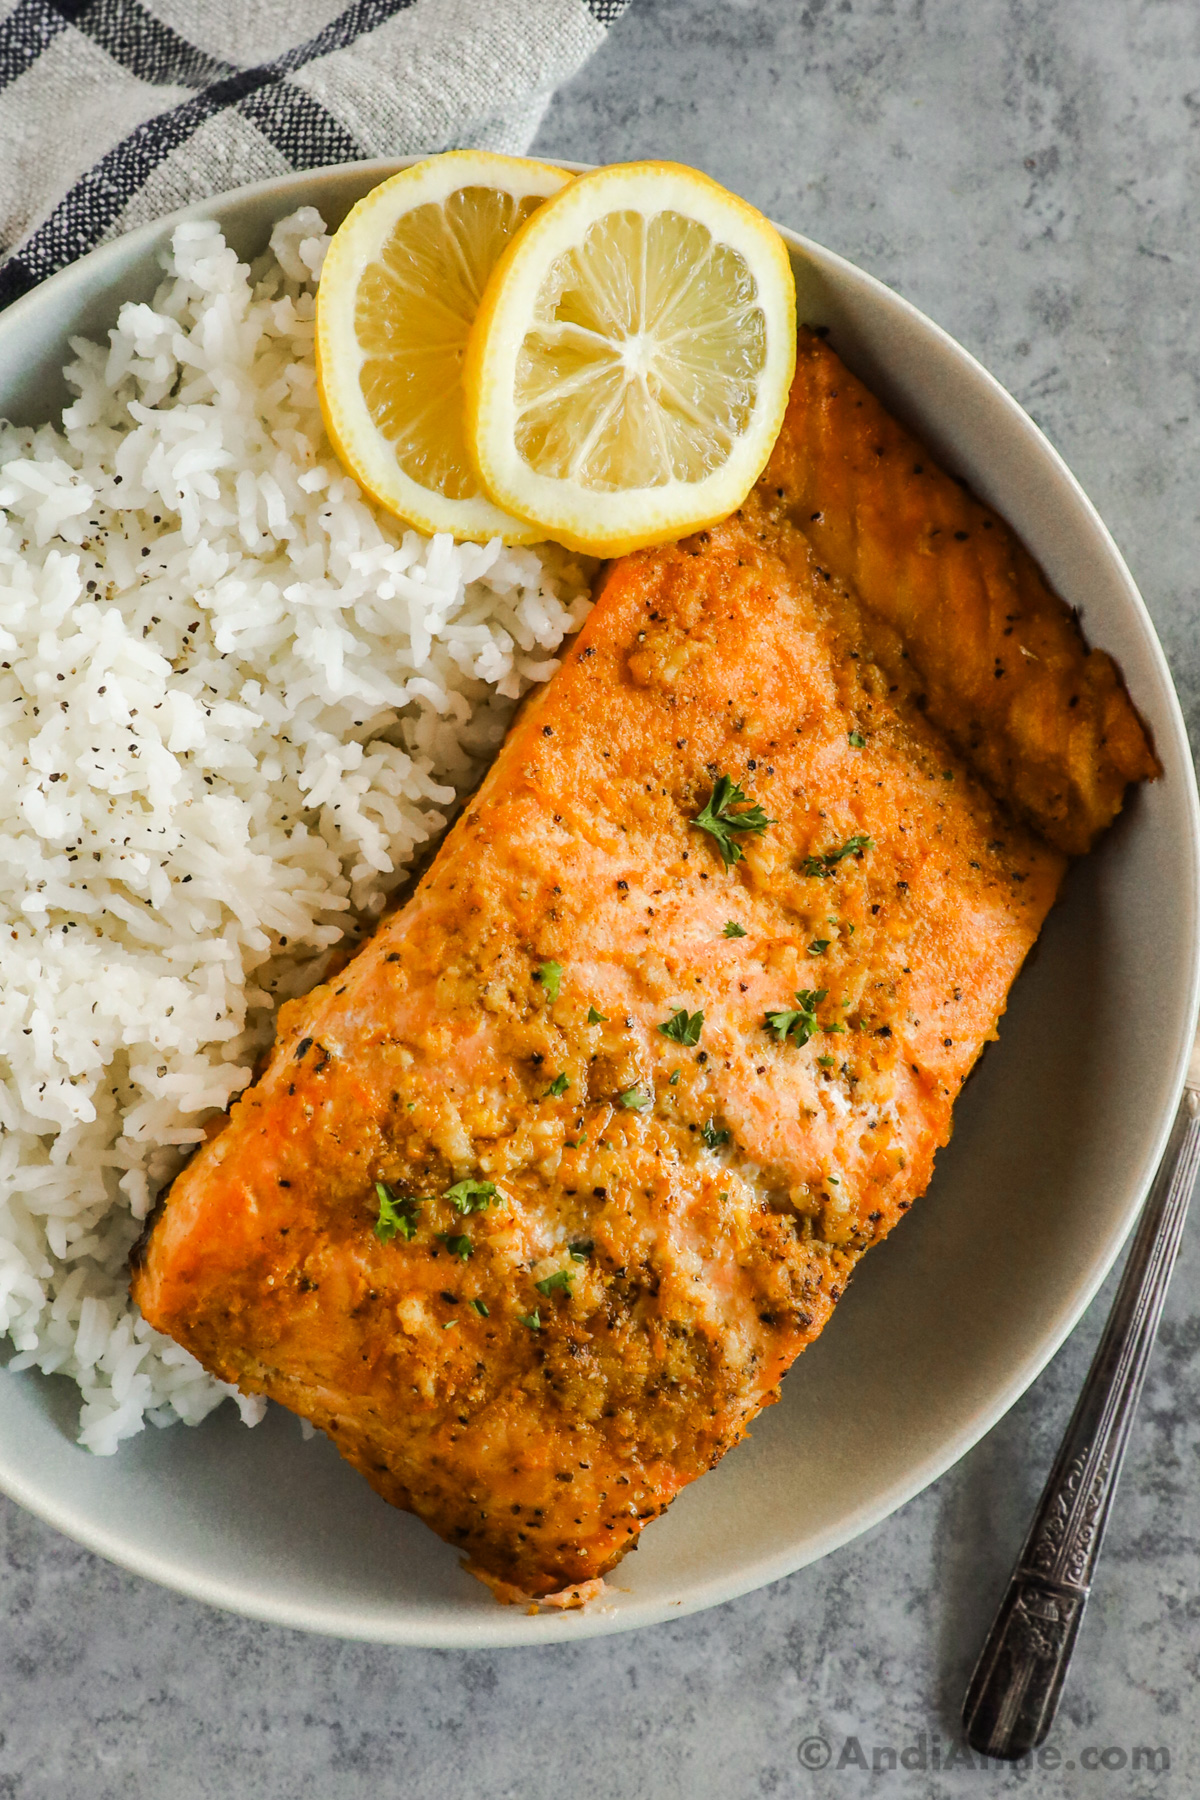 A plated with salmon fillet, rice and slices of lemon.